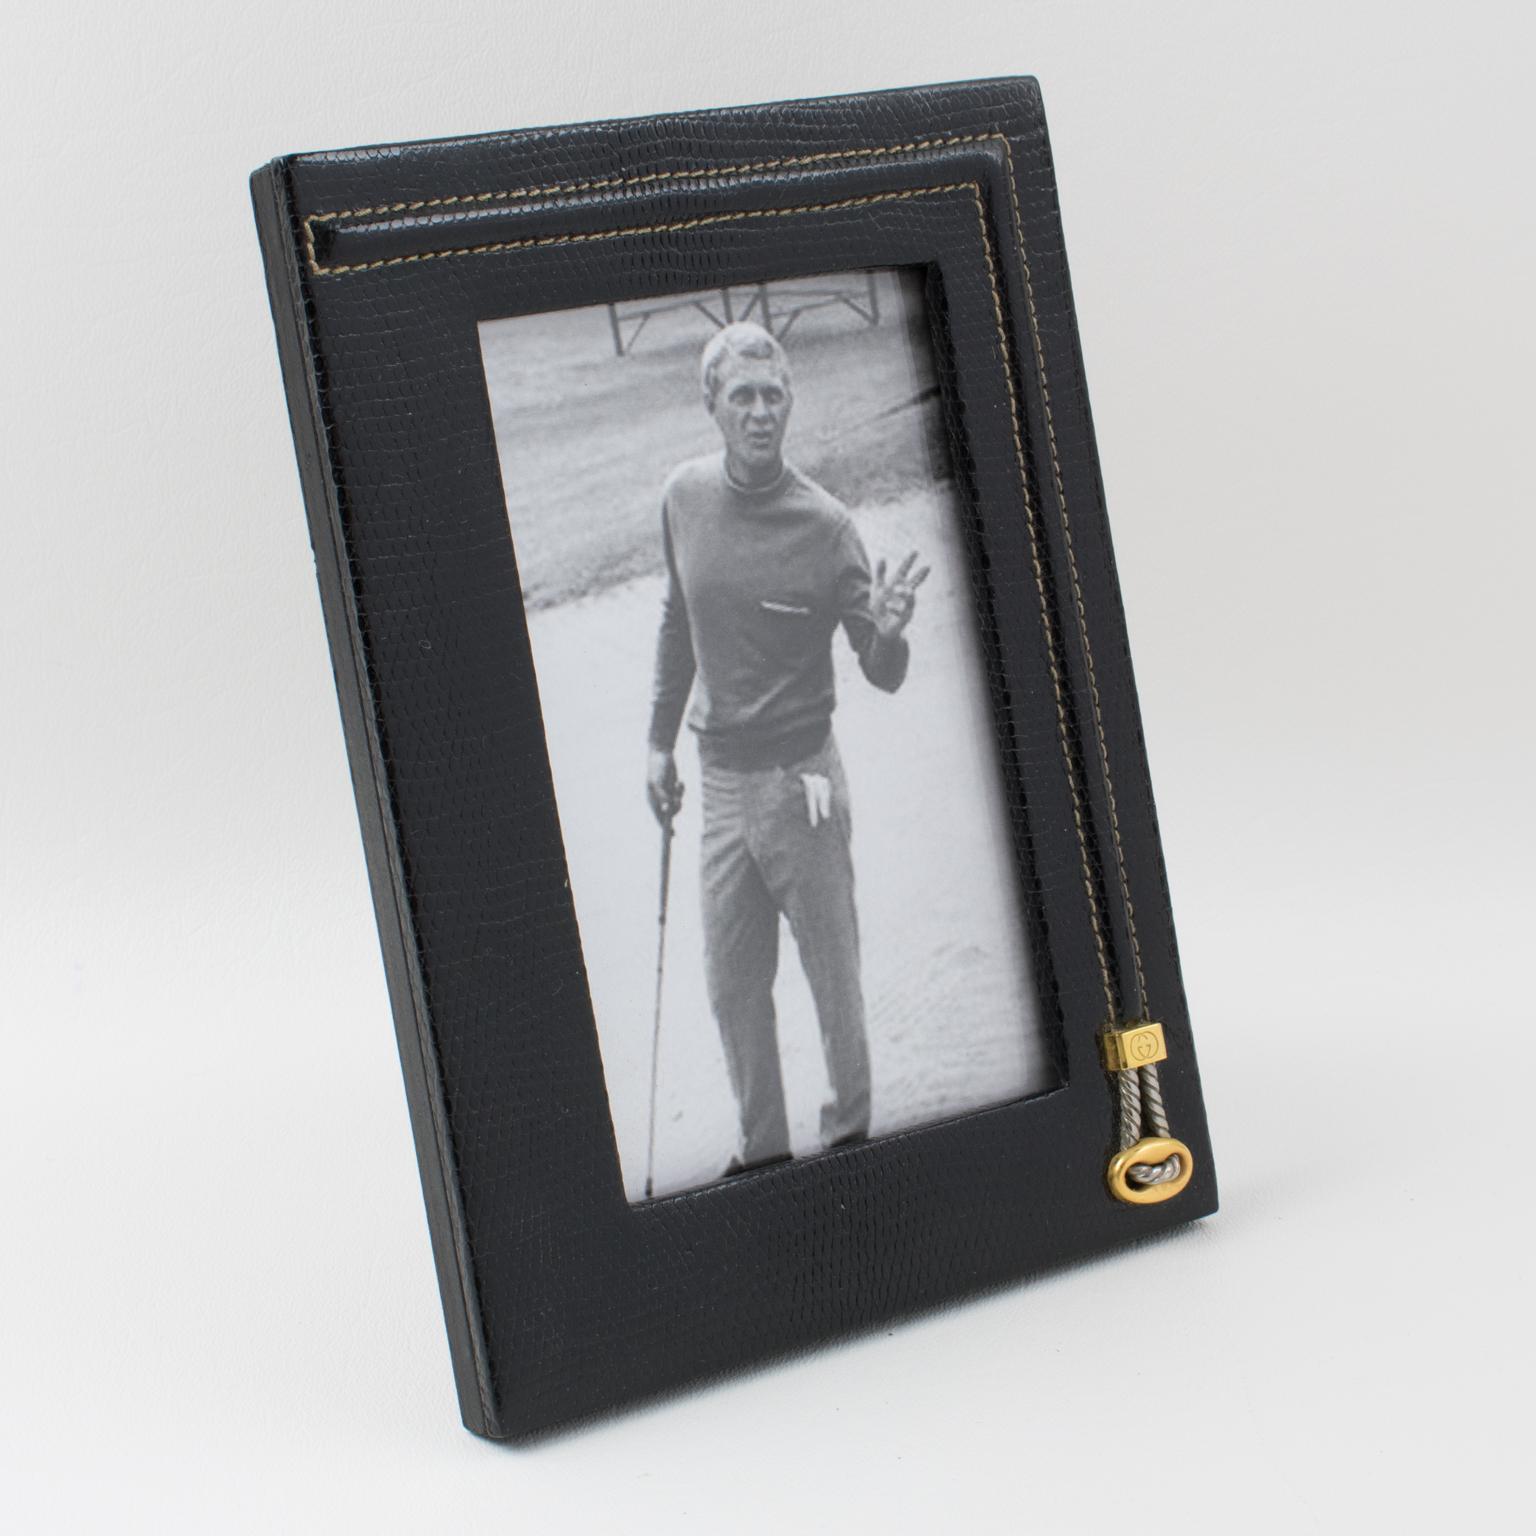 Superb picture photo frame by Italian designer Gucci. Timeless and elegant black leather with textured pattern ornate with handstitched asymmetric decor. Chrome and brass buckle on the side with engraved Gucci brand logo. Back and easel in black